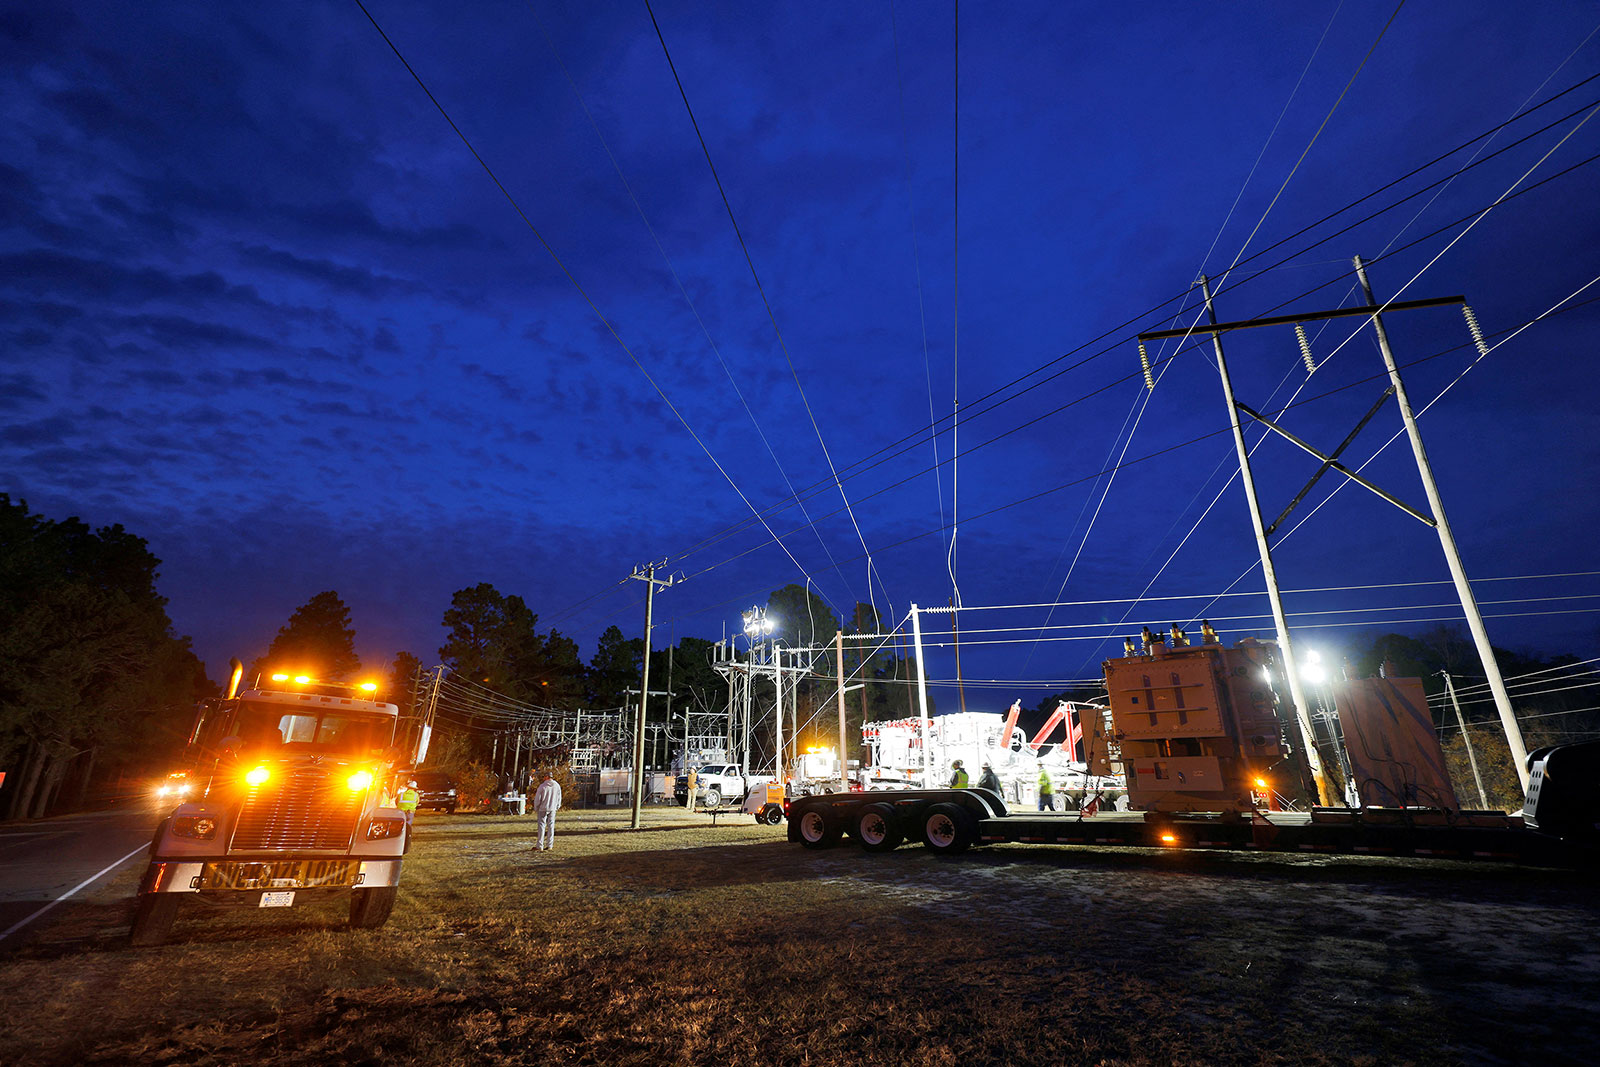 Duke Energy personnel work to restore power at a crippled electrical substation in Carthage, North Carolina, on December 4.